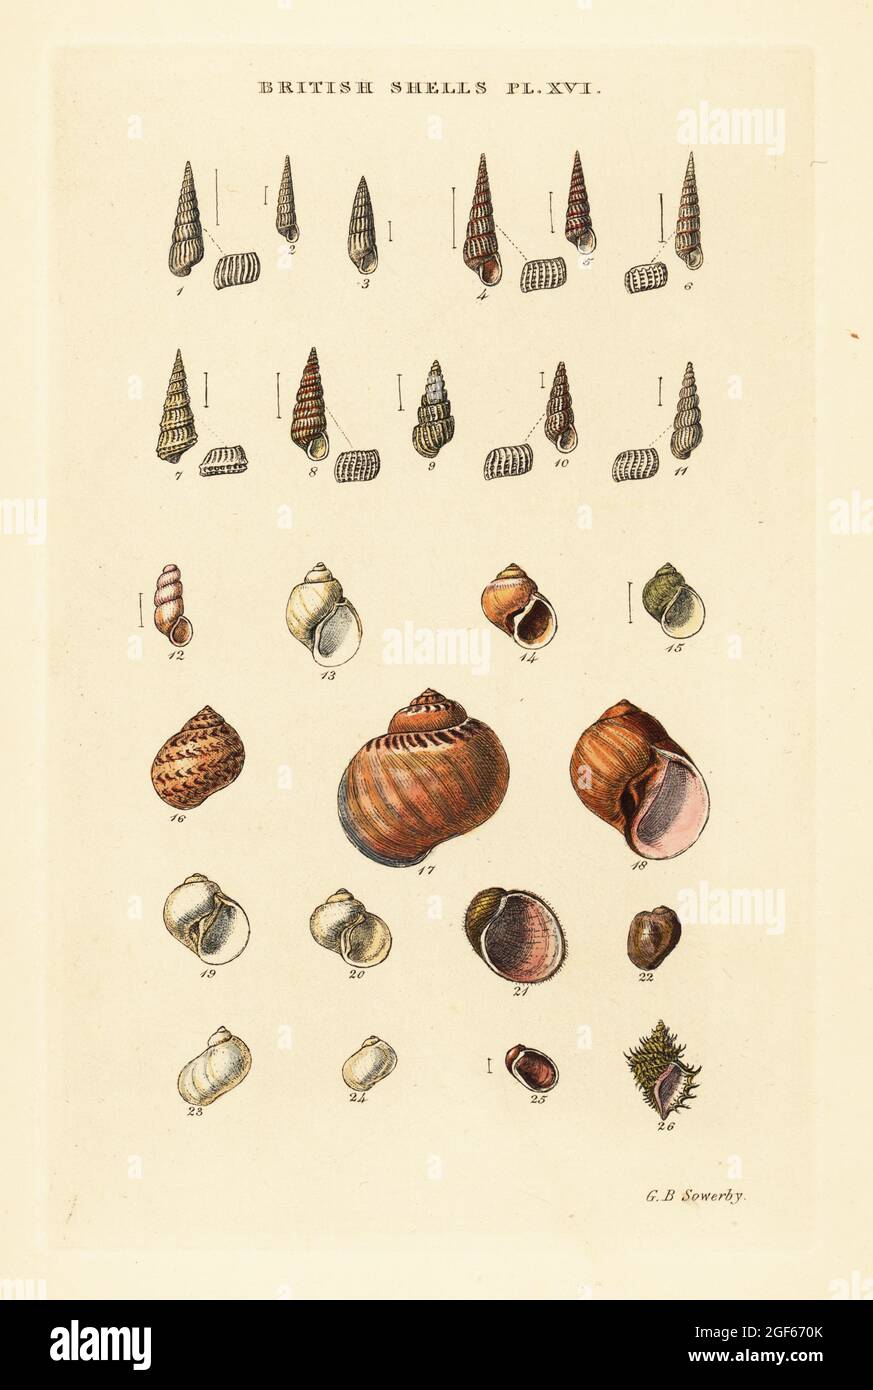 Small sea shell varieties, Turbonilla, Chemnitzia, Natica, Velutina, etc. Handcoloured copperplate engraving by George Brettingham Sowerby from his own Illustrated Index of British Shells, Sowerby and Simpkin, Marshall & Co., London, 1859. George Brettingham Sowerby II (1812-1884), British naturalist, illustrator, and conchologist. Stock Photo